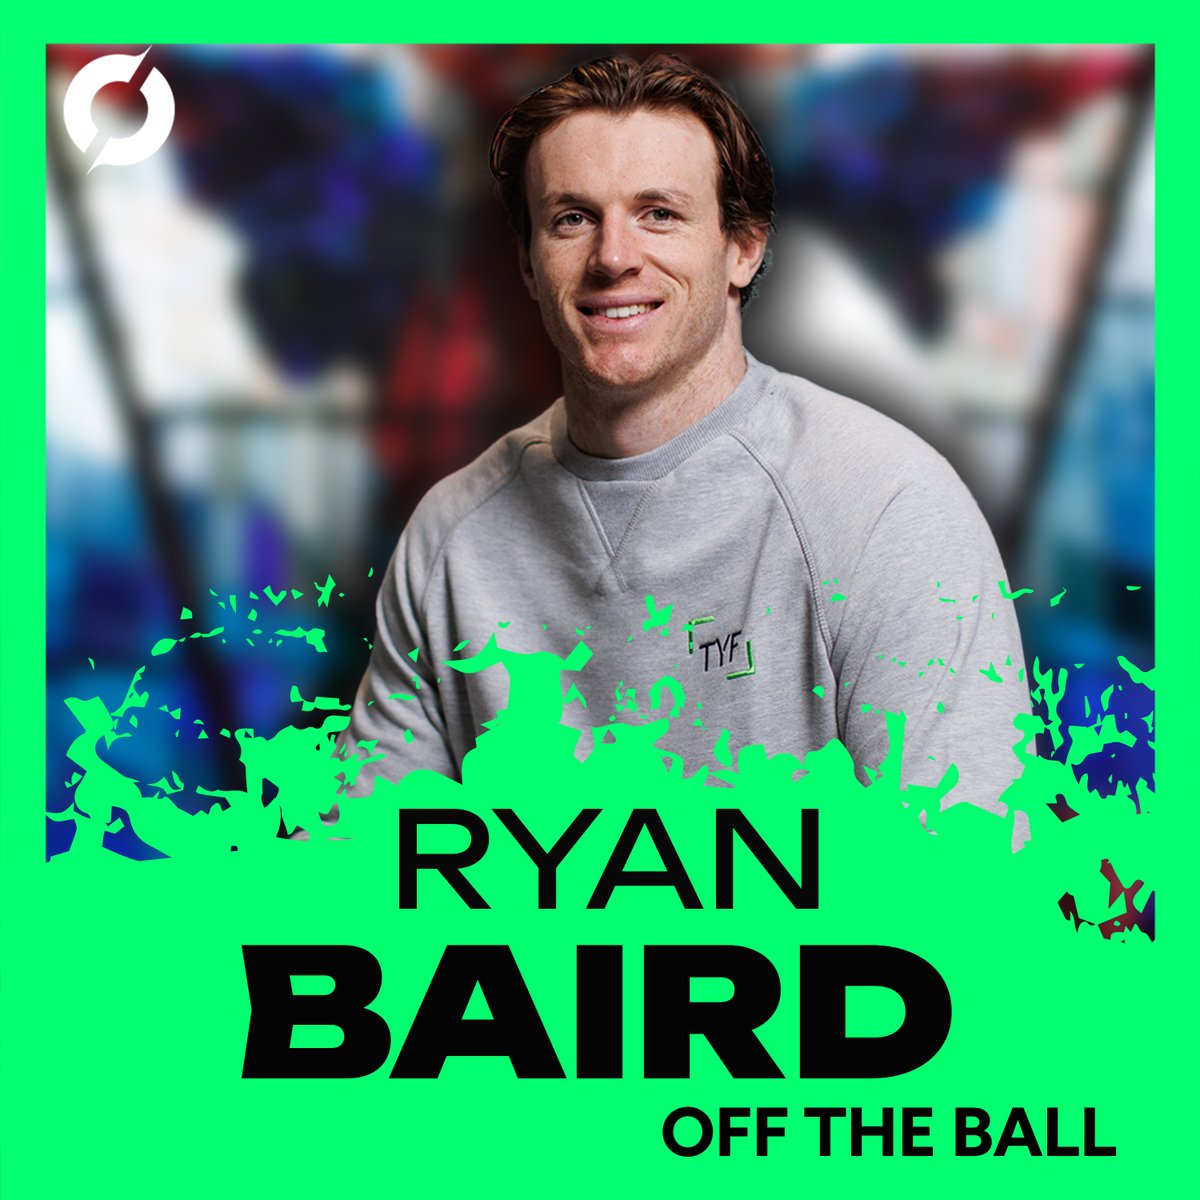 𝐓𝐀𝐂𝐊𝐋𝐄 𝐘𝐎𝐔𝐑 𝐅𝐄𝐄𝐋𝐈𝐍𝐆𝐒: 𝐑𝐘𝐀𝐍 𝐁𝐀𝐈𝐑𝐃 🏉 - Learning from teammates. - Adding consistency to his performances. @TYFIreland ambassador, Ireland and Leinster forward Ryan Baird, joined Joe for a chat on tonight's Off The Ball. 🎧: link.goloudplayer.com/s/pGt6ZCjBDd4A